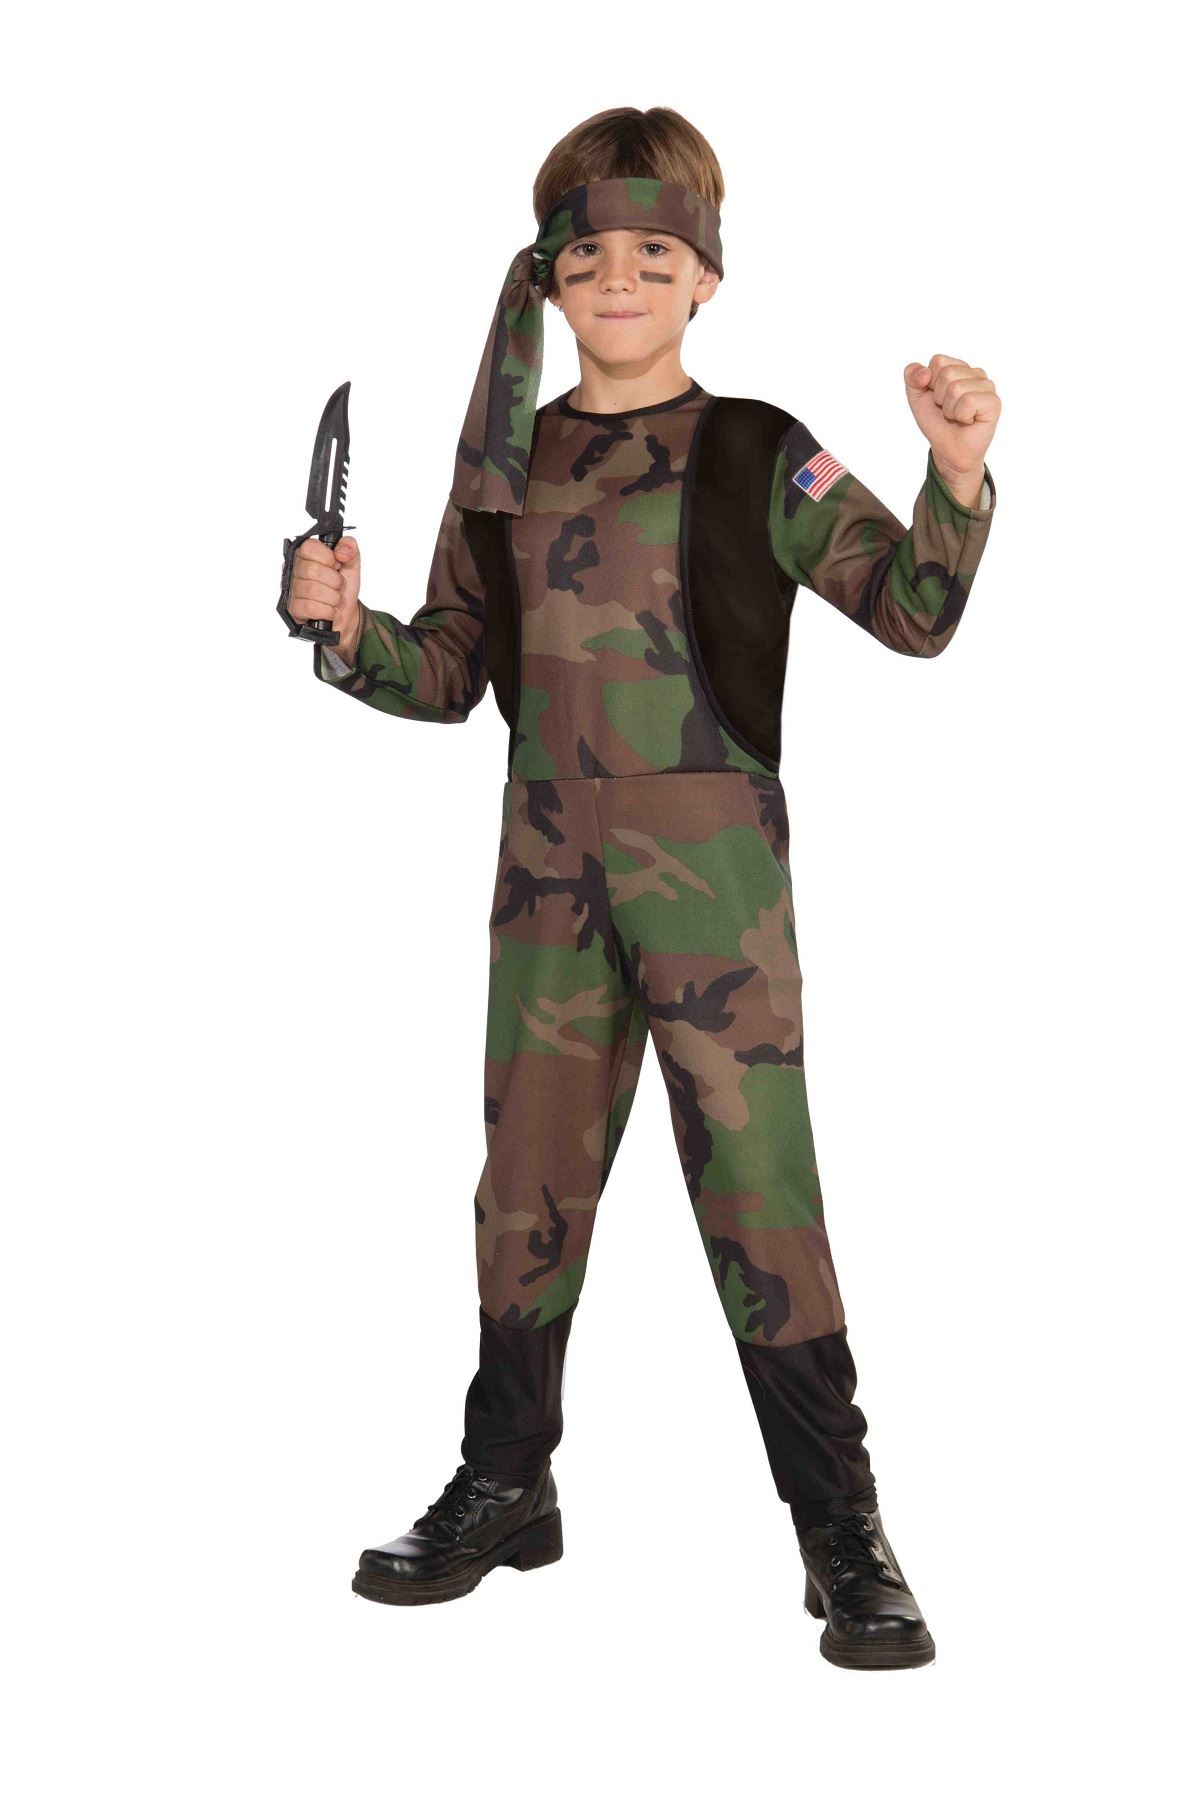 Kids Boys Classic Army Costume | $14.99 | The Costume Land